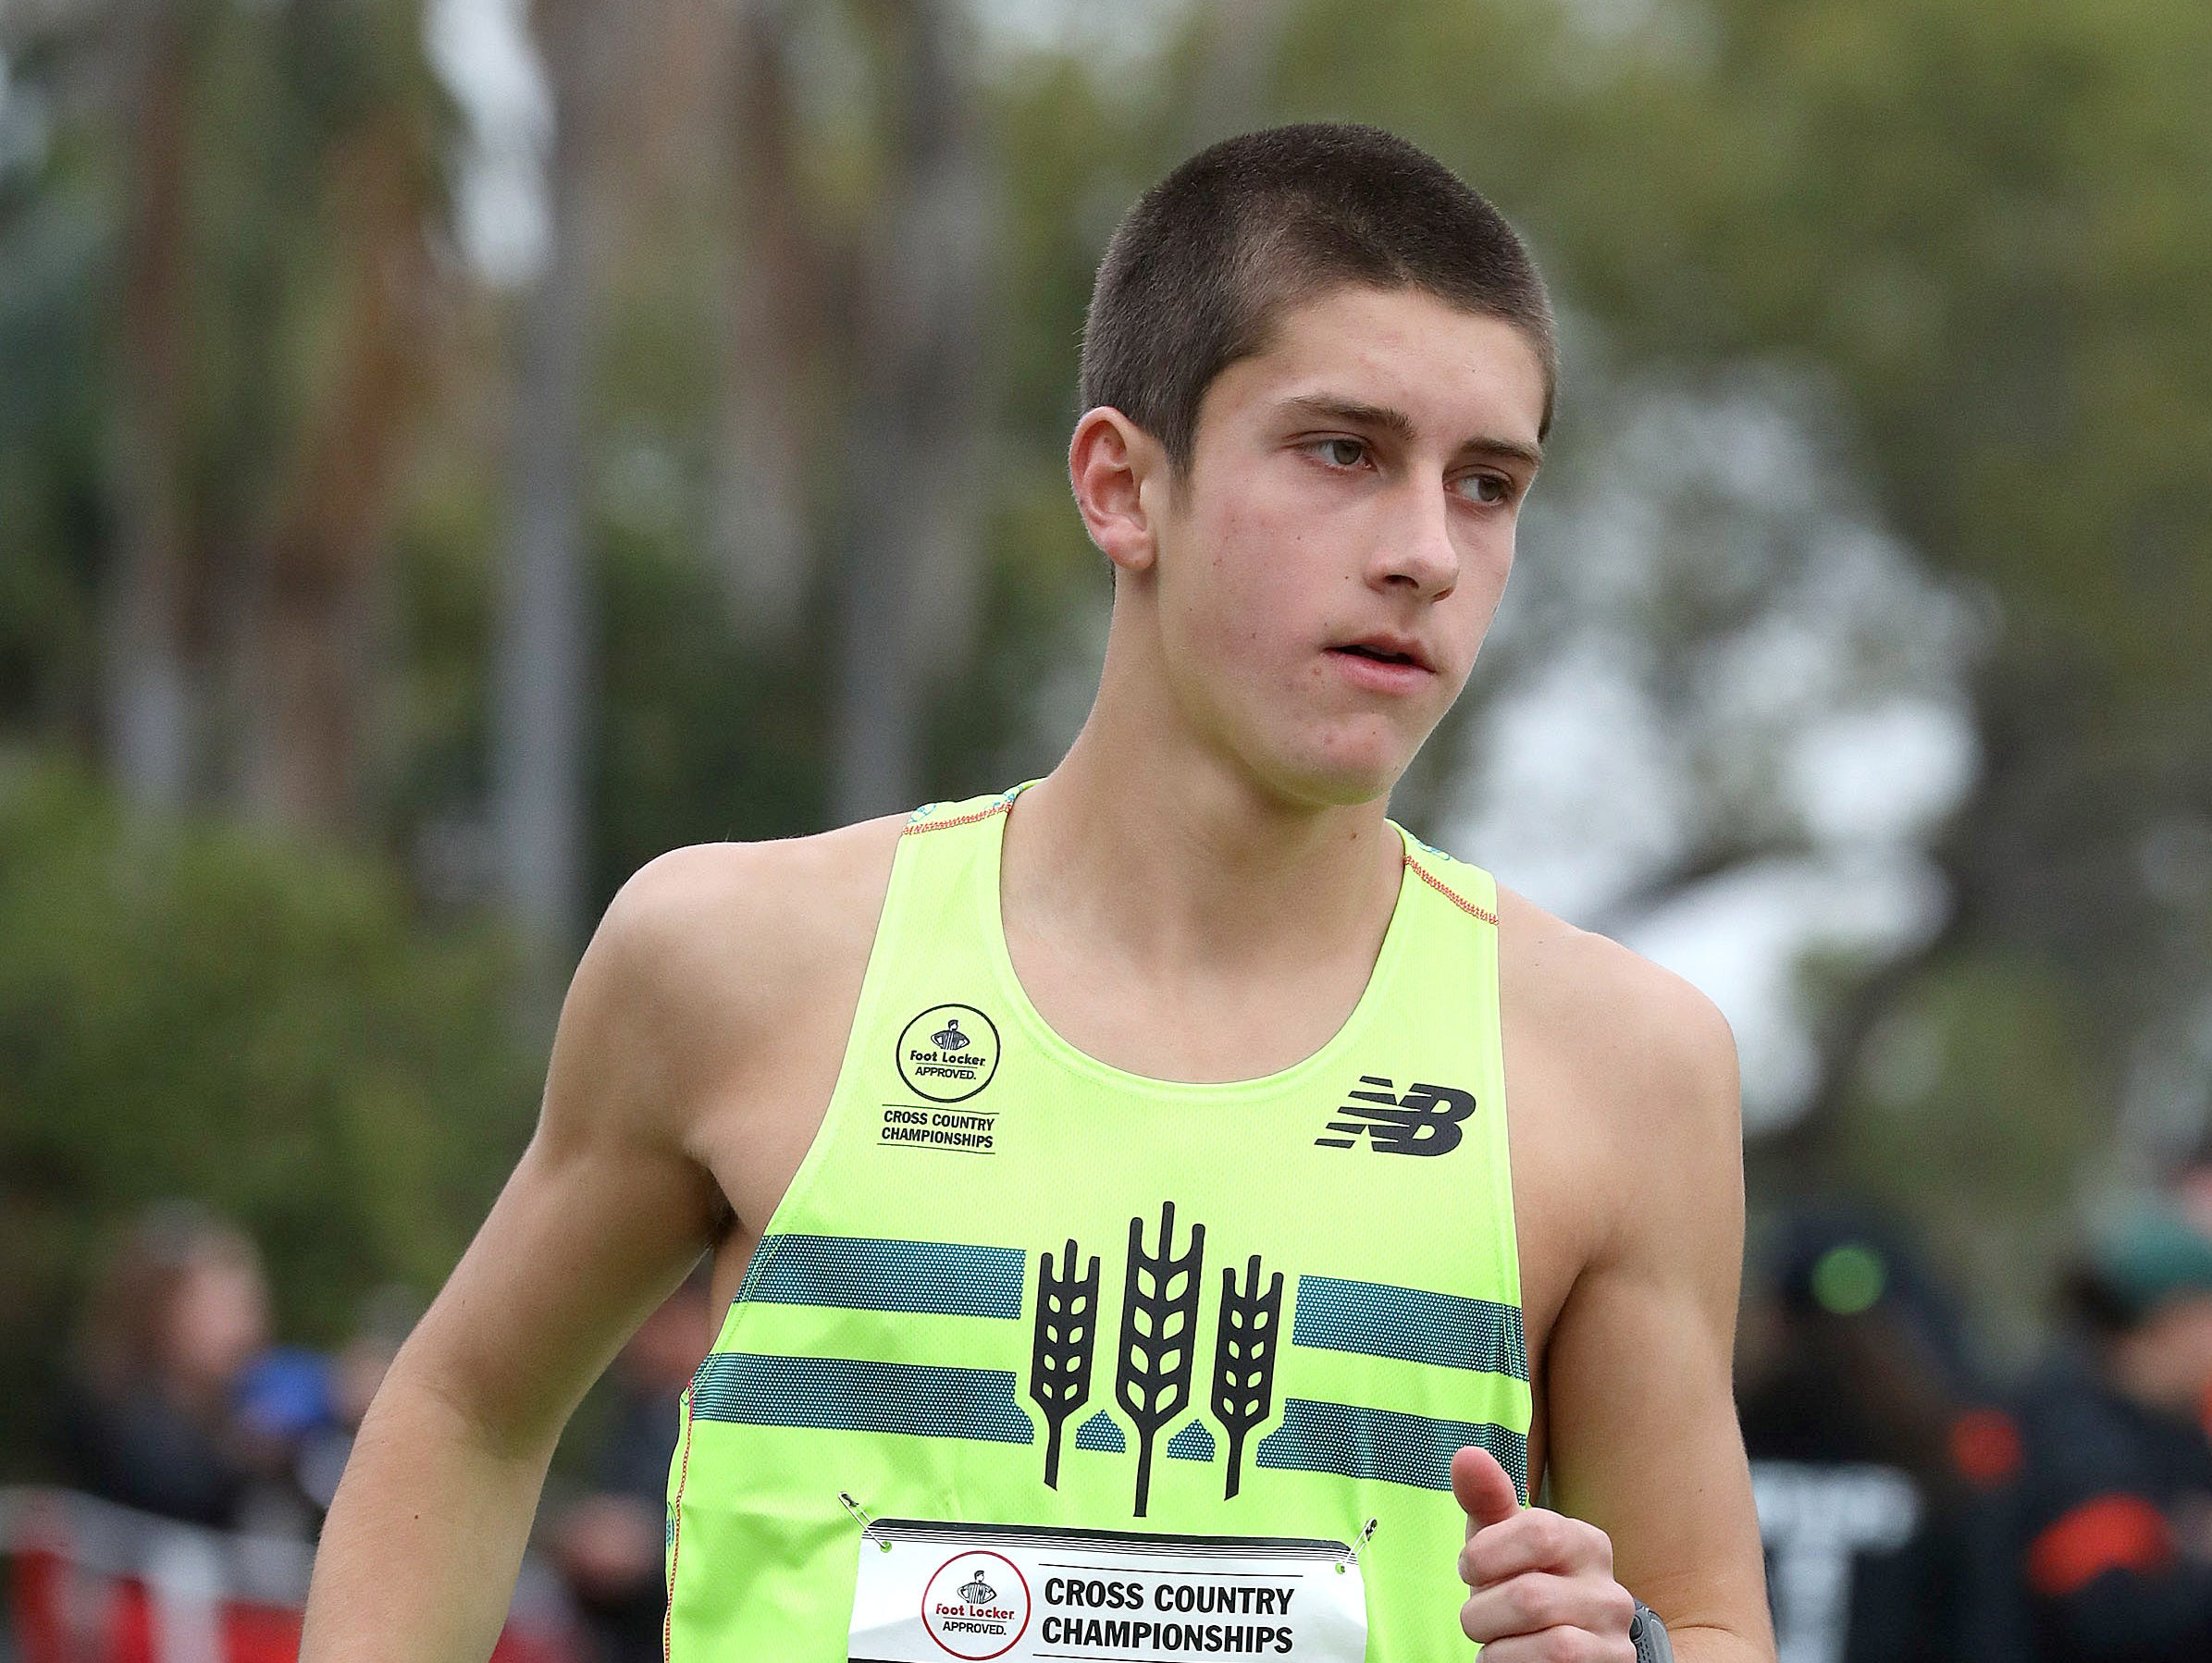 Corunna's Noah Jacobs finished 14th at the Foot Locker Cross Country Championships on Saturday in San Diego.